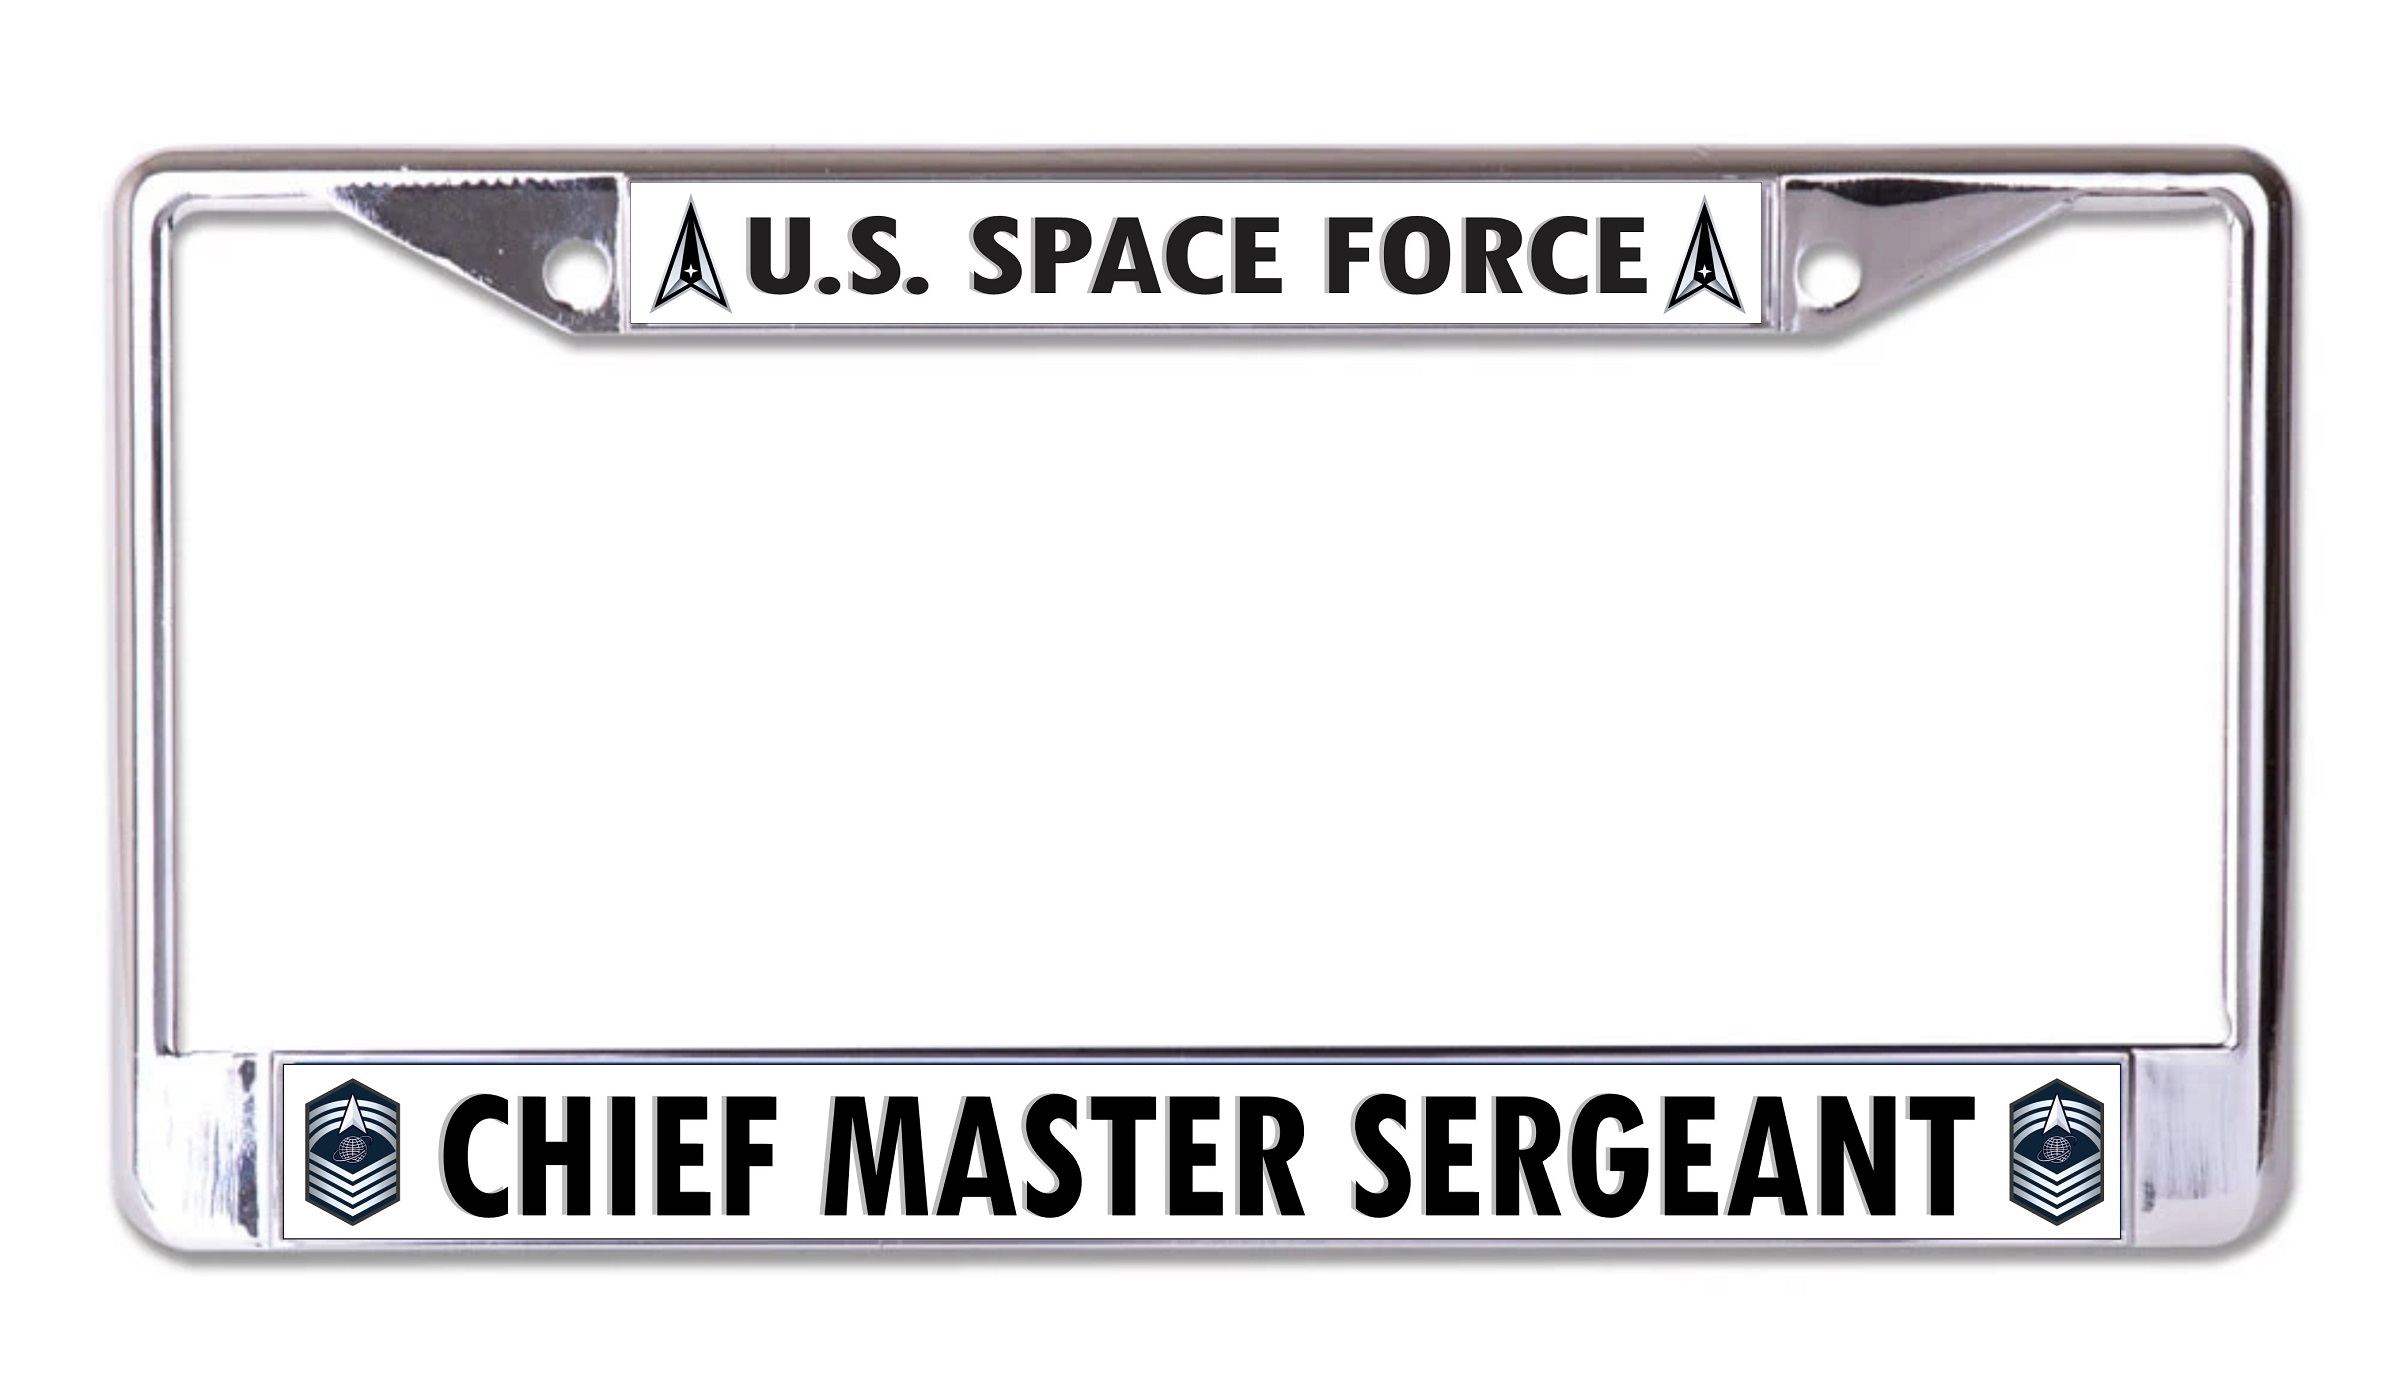 U.S. Space Force Chief Master Sergeant Chrome LICENSE PLATE Frame